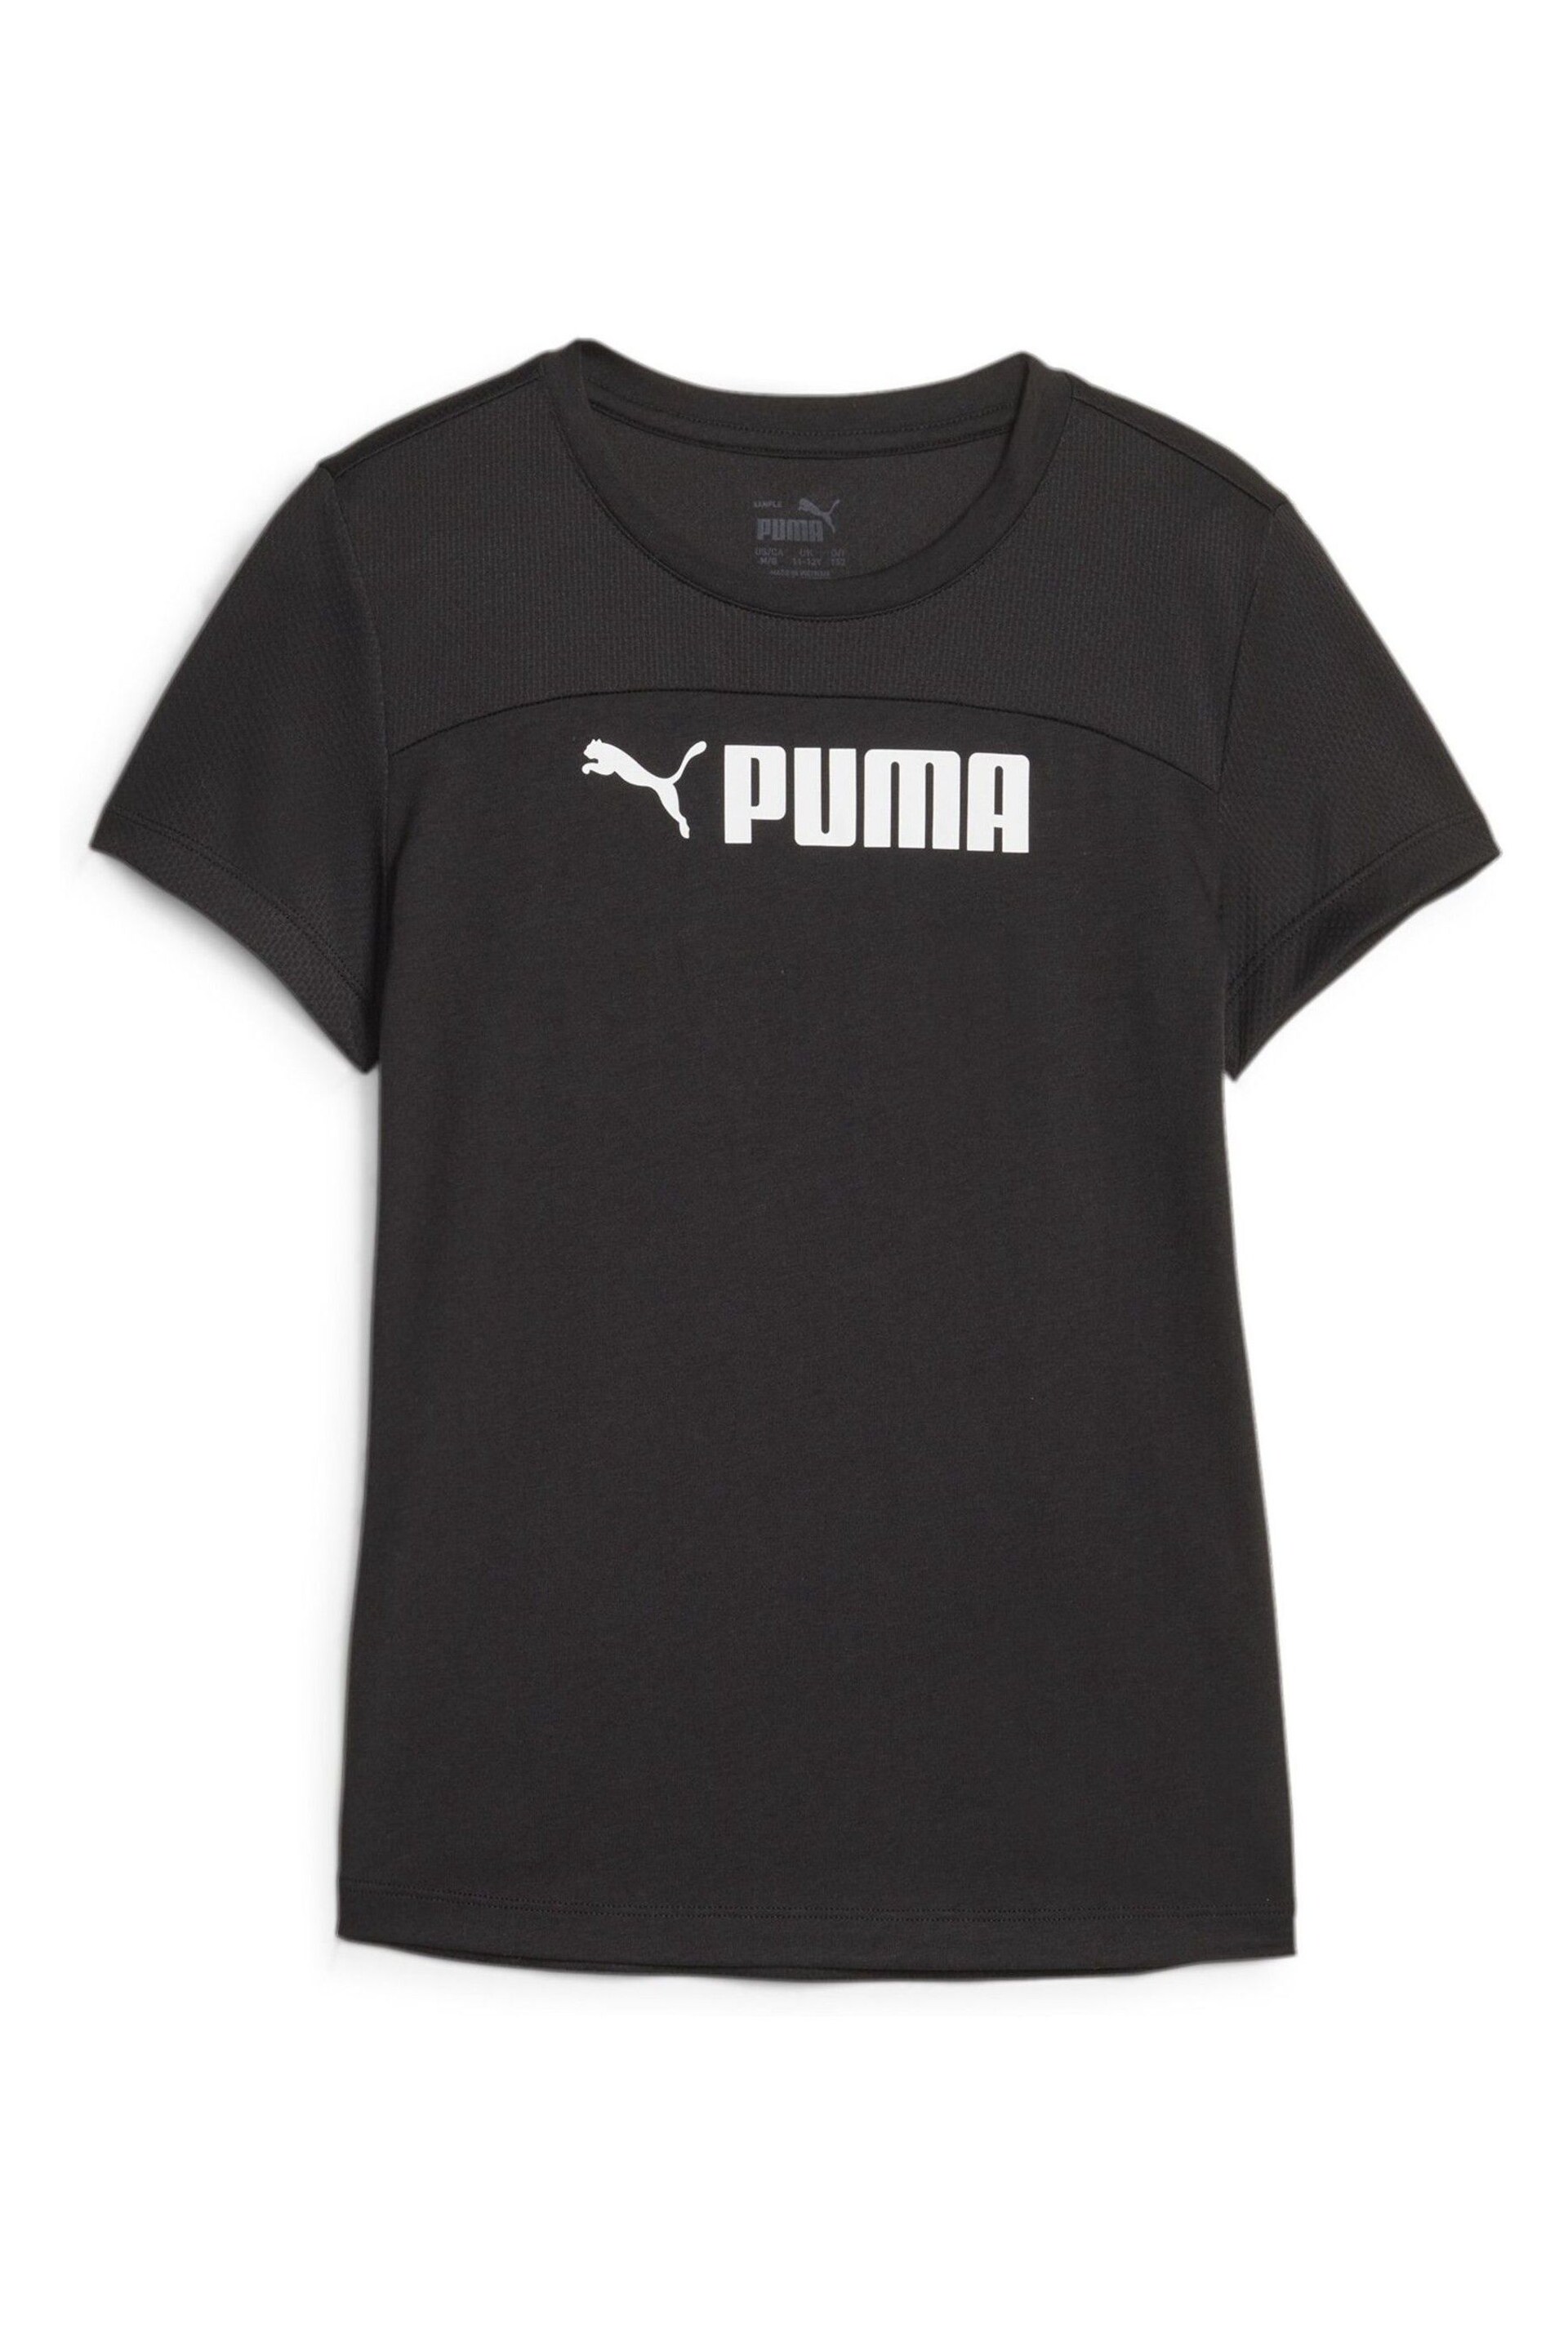 Puma Black FIT Youth T-Shirt - Image 4 of 5